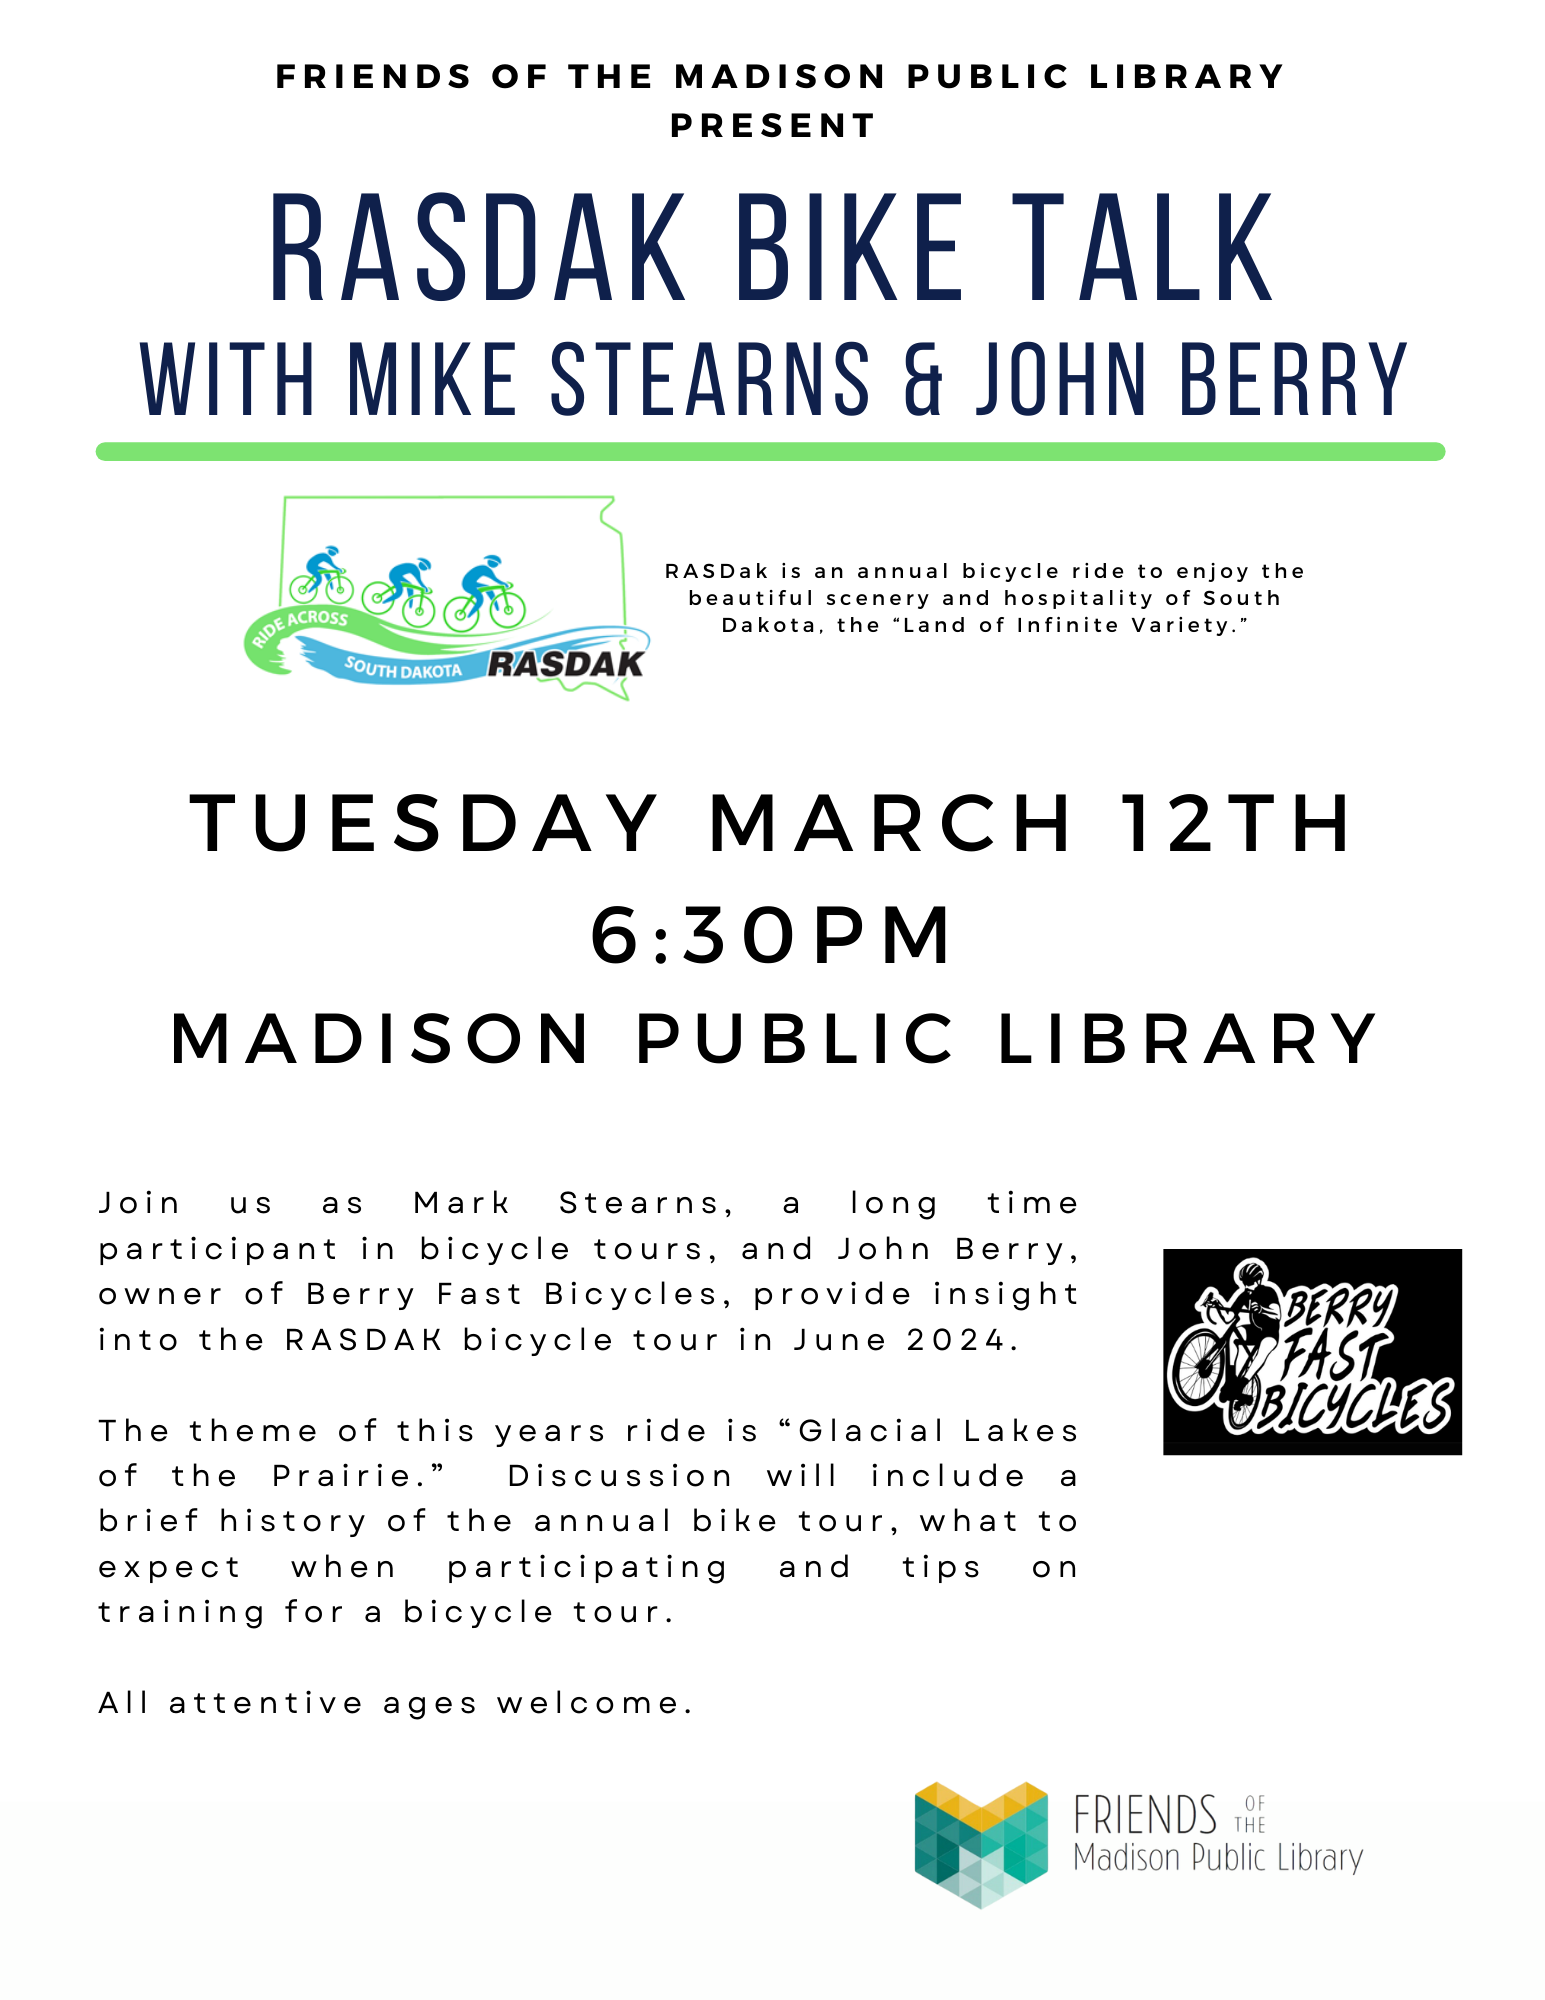 <h1 class="tribe-events-single-event-title">RASDAK Bike talk with Mike Stearns & John berry</h1>